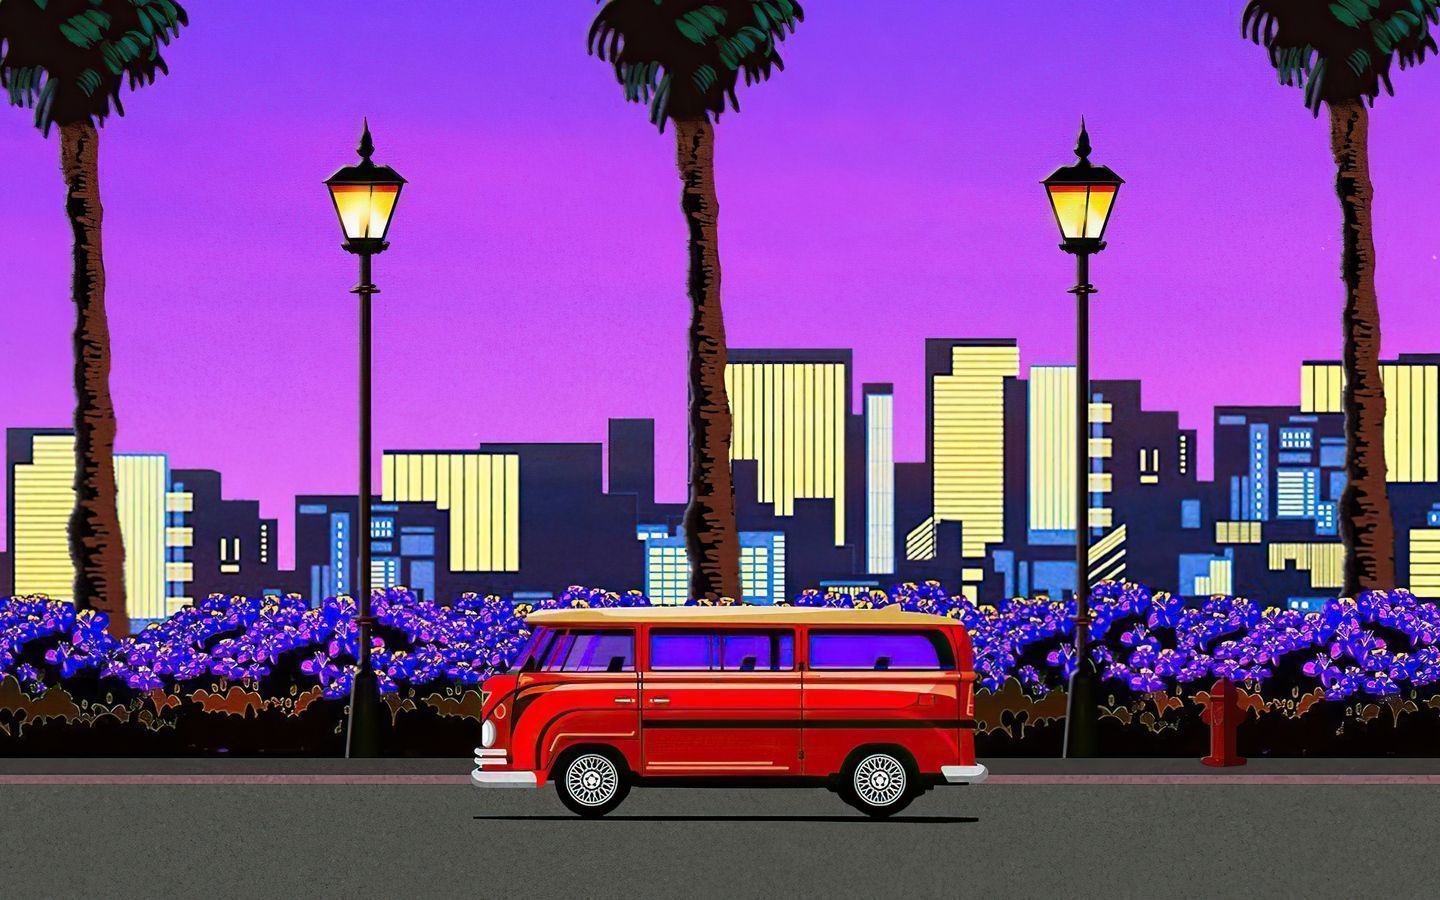 A red van parked on the side of the road in front of a city skyline. - 1440x900